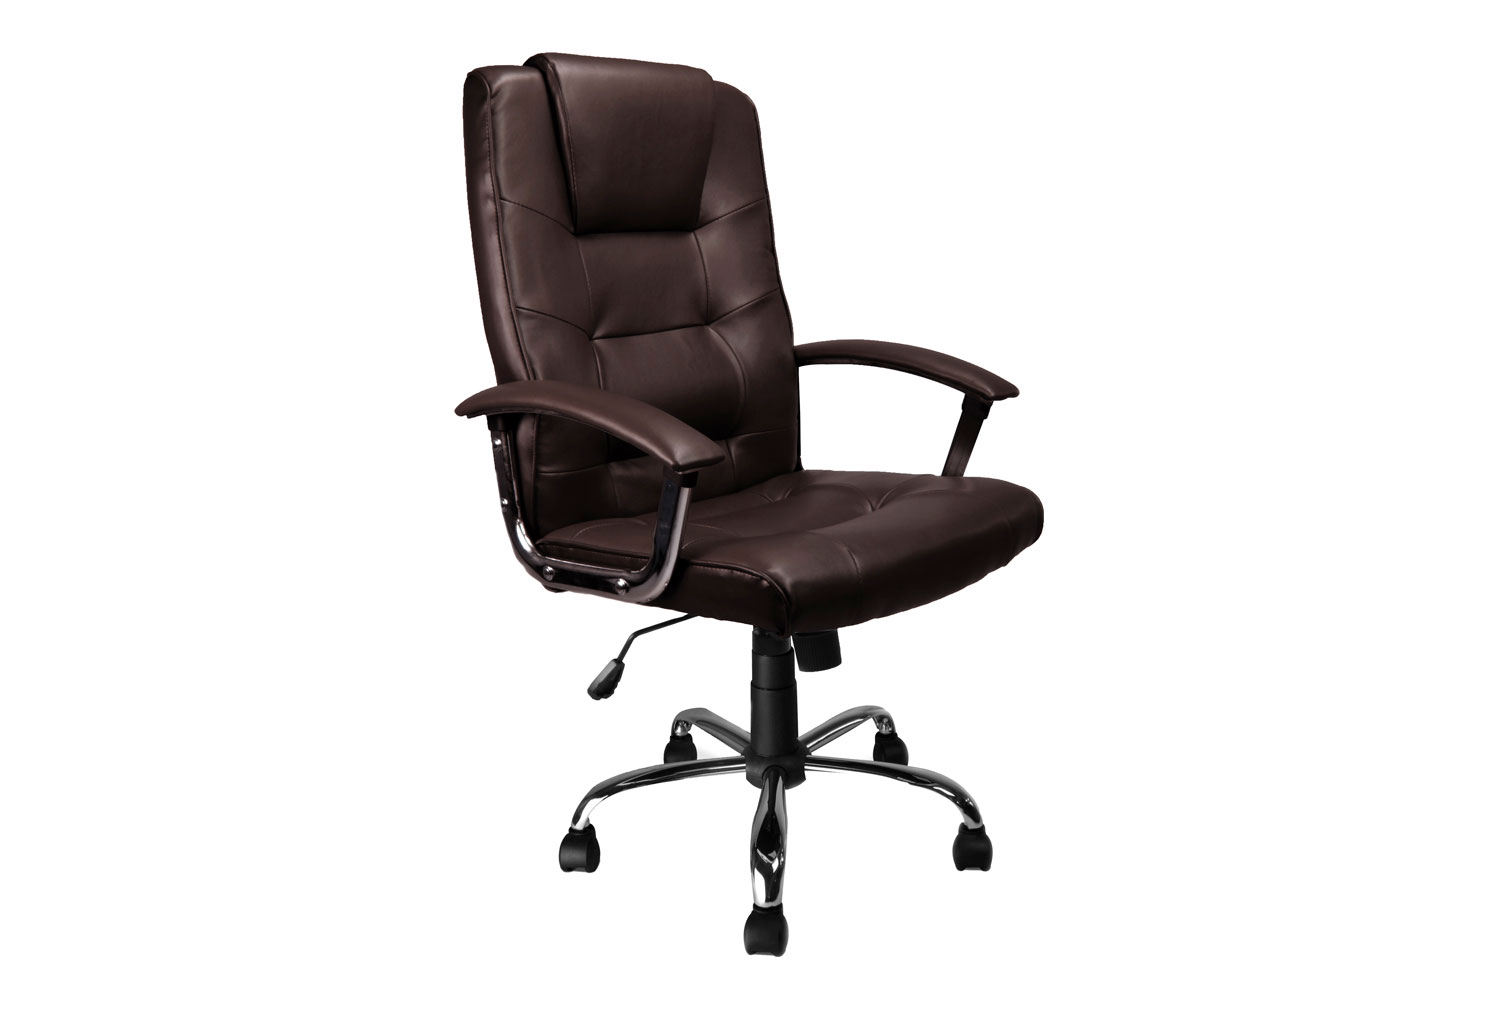 Skye High Back Brown Leather Faced Executive Office Chair, Brown, Fully Installed